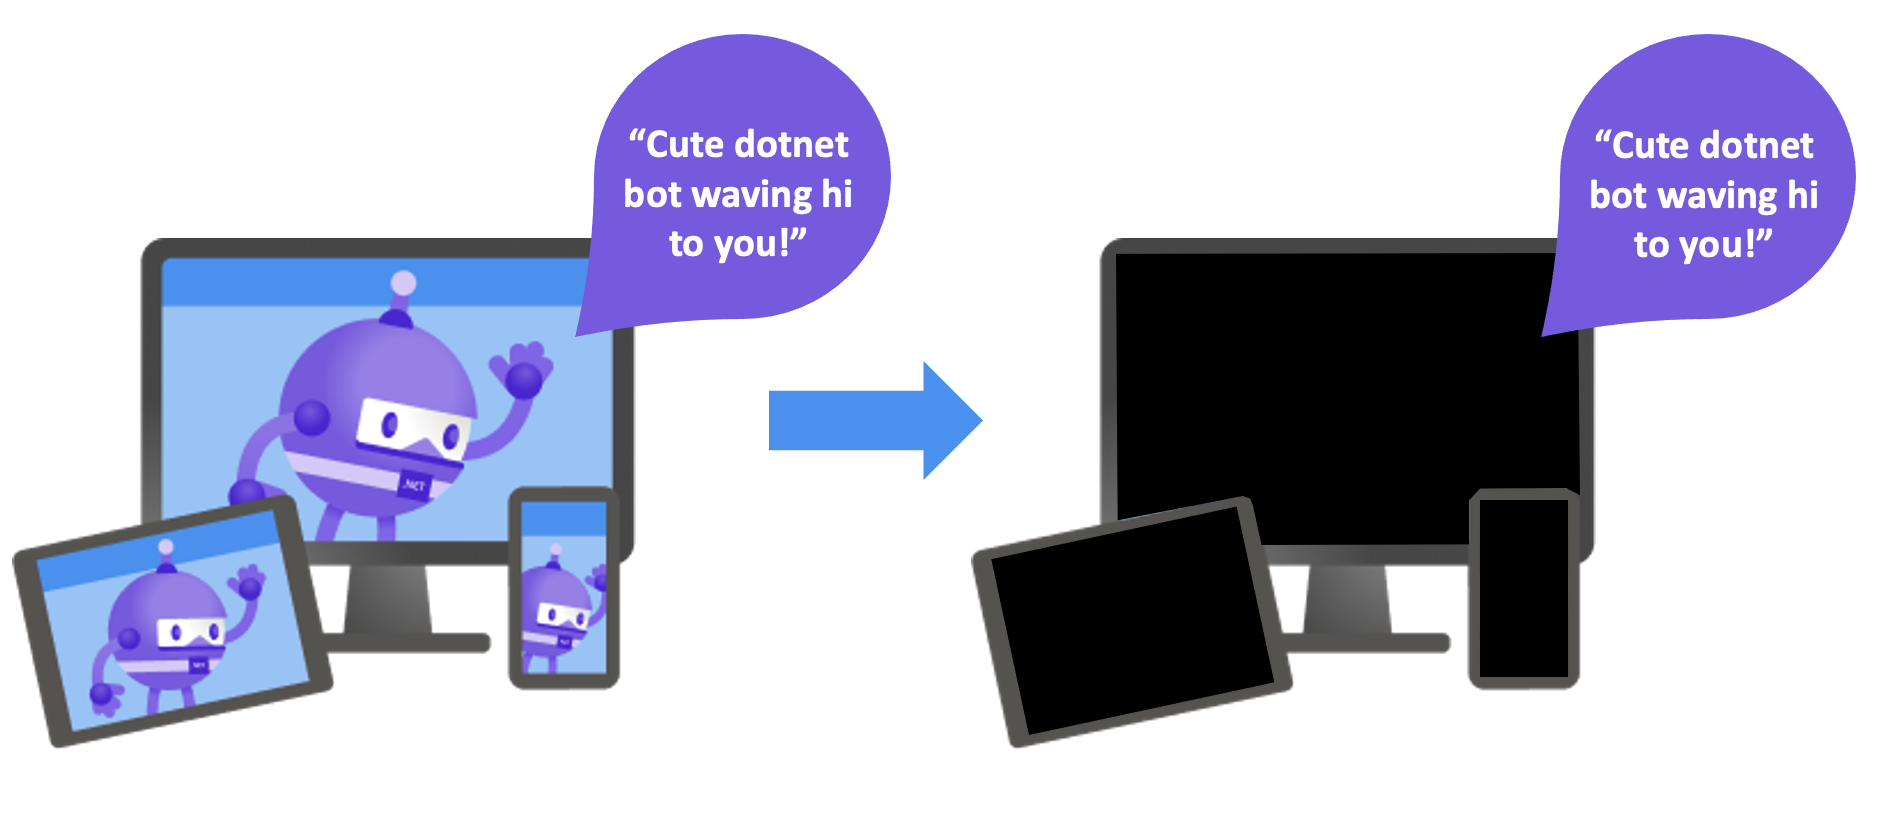 Diagram demonstrating the screen reader experience via an image announced as "Cute dotnet bot waving hi to you!"